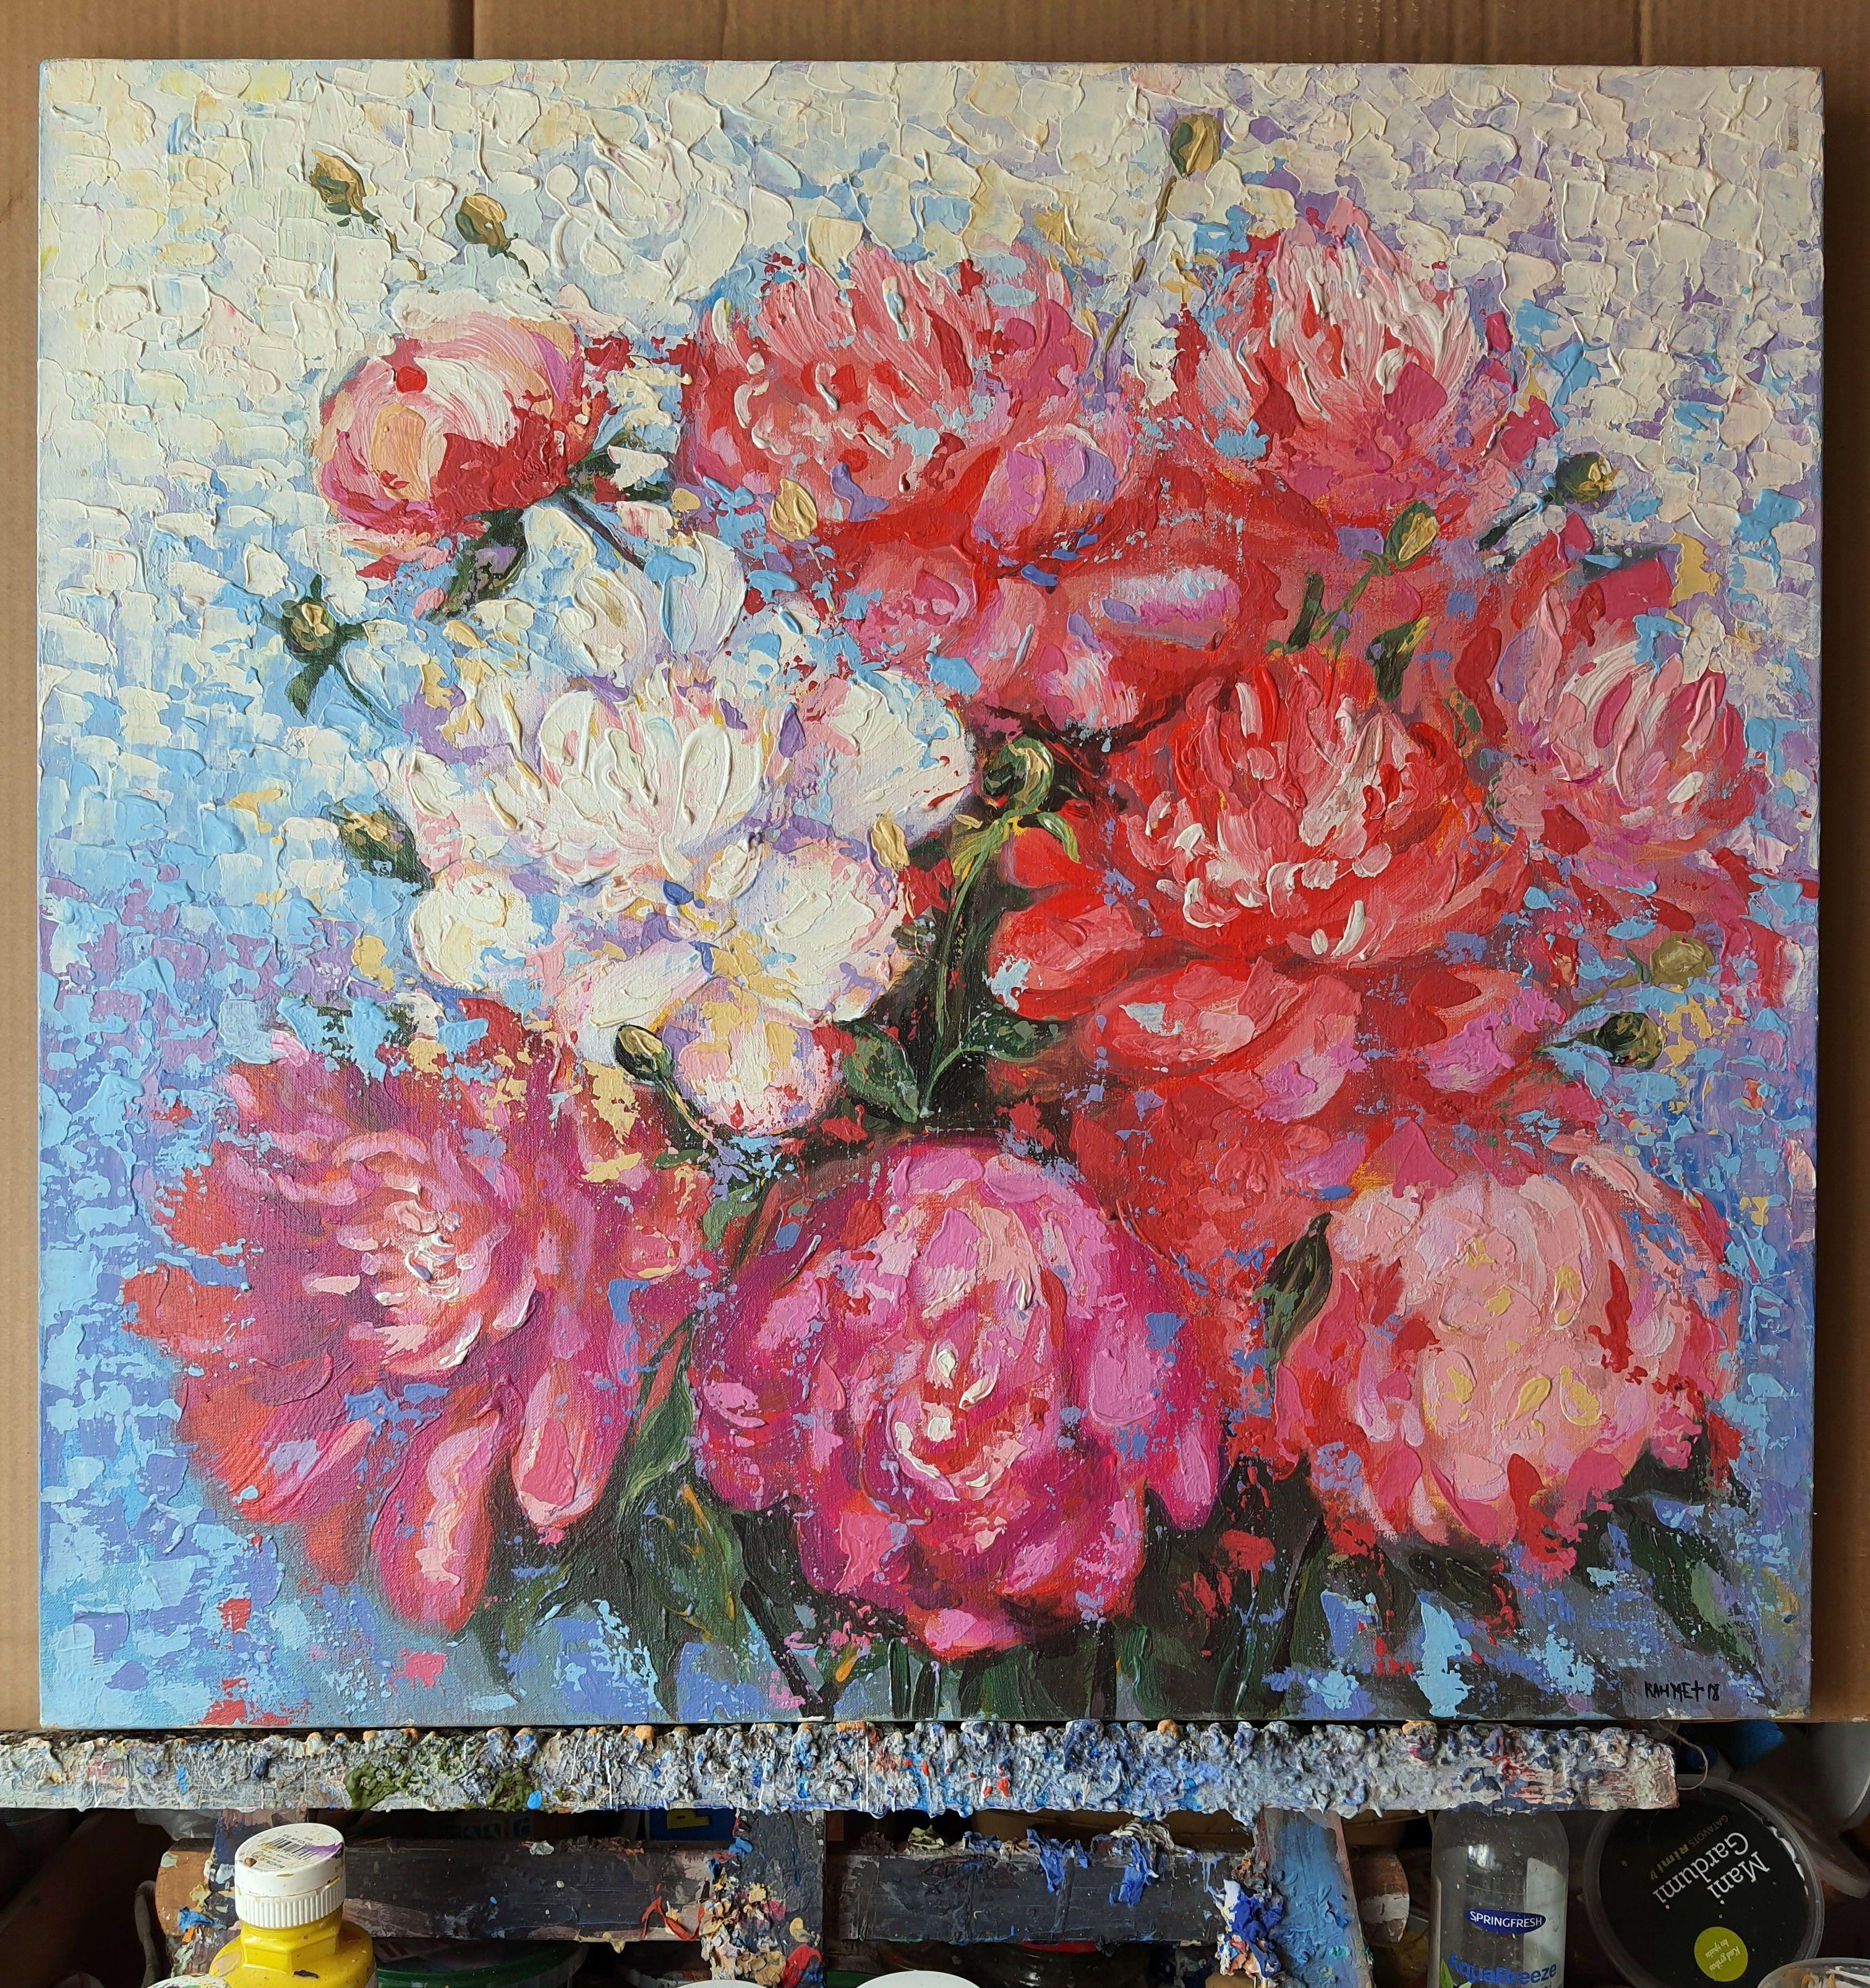 In crafting this piece, I've poured vibrant emotions into each stroke of acrylic and oil, seeking to capture the transient beauty of life through the expressionist and impressionist styles. The lush peonies burst with joy, symbolizing the radiance